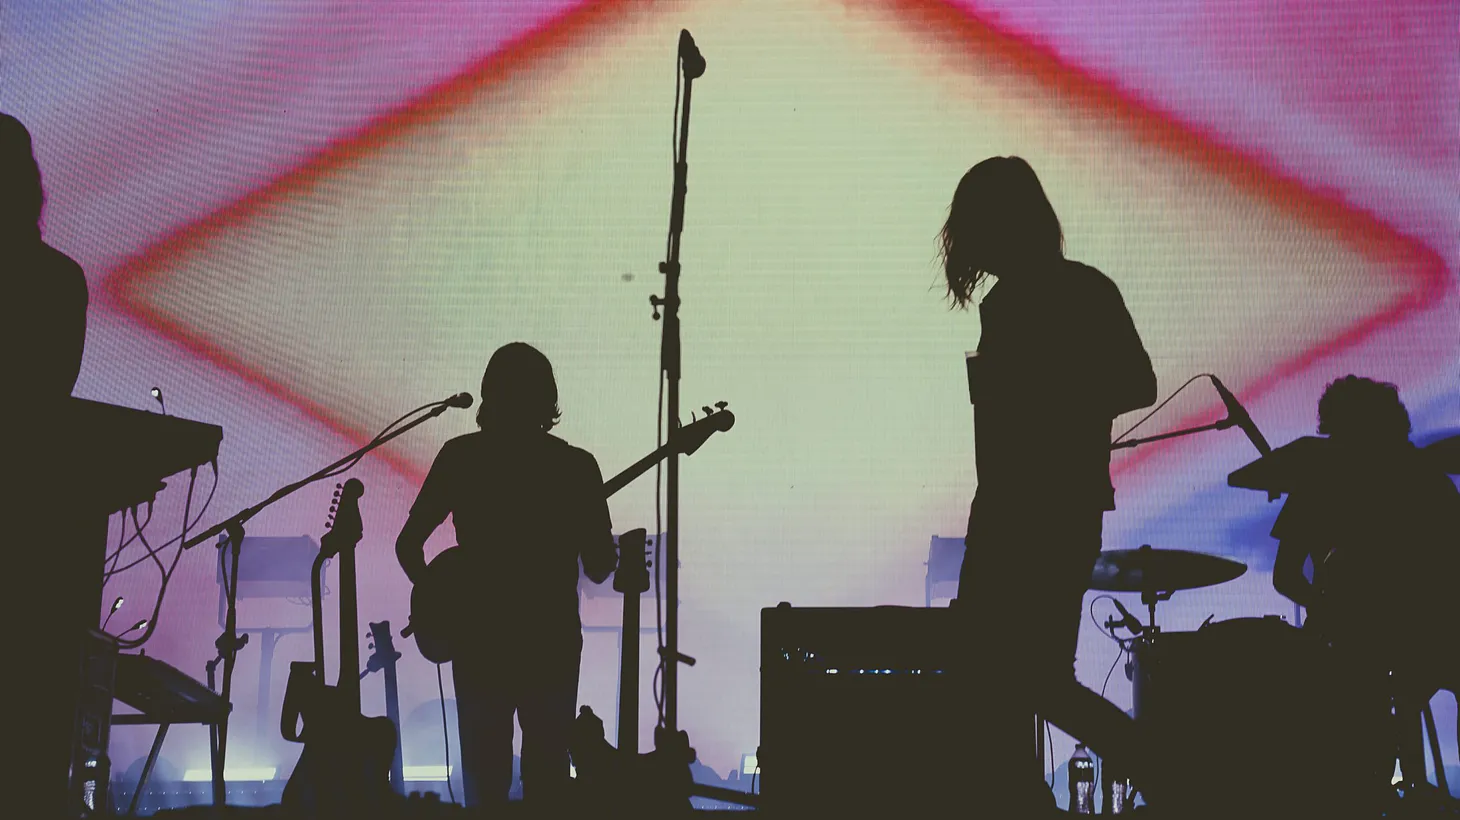 This year, Tame Impala (pictured here in 2014) will celebrate the tenth year of their album “Lonerism” at Desert Daze.